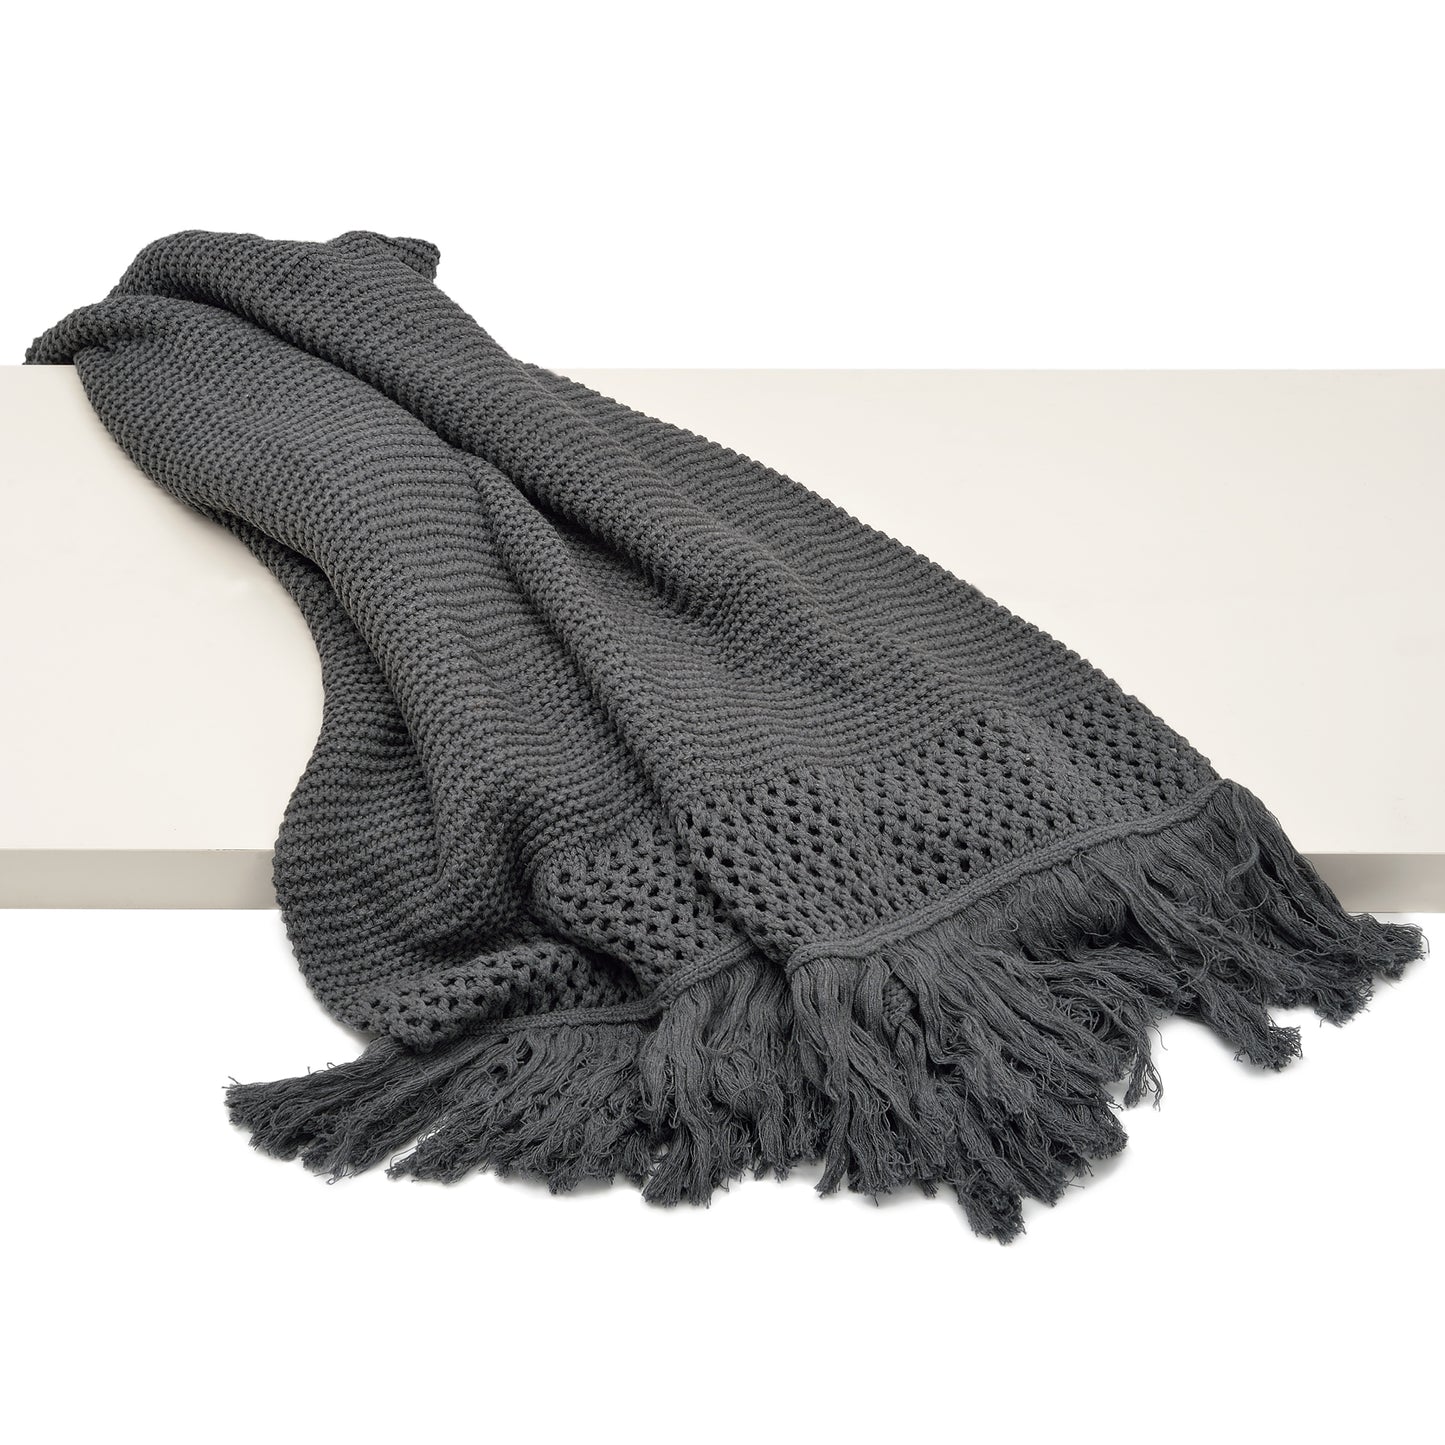 Benny Fringed Throw - Charcoal